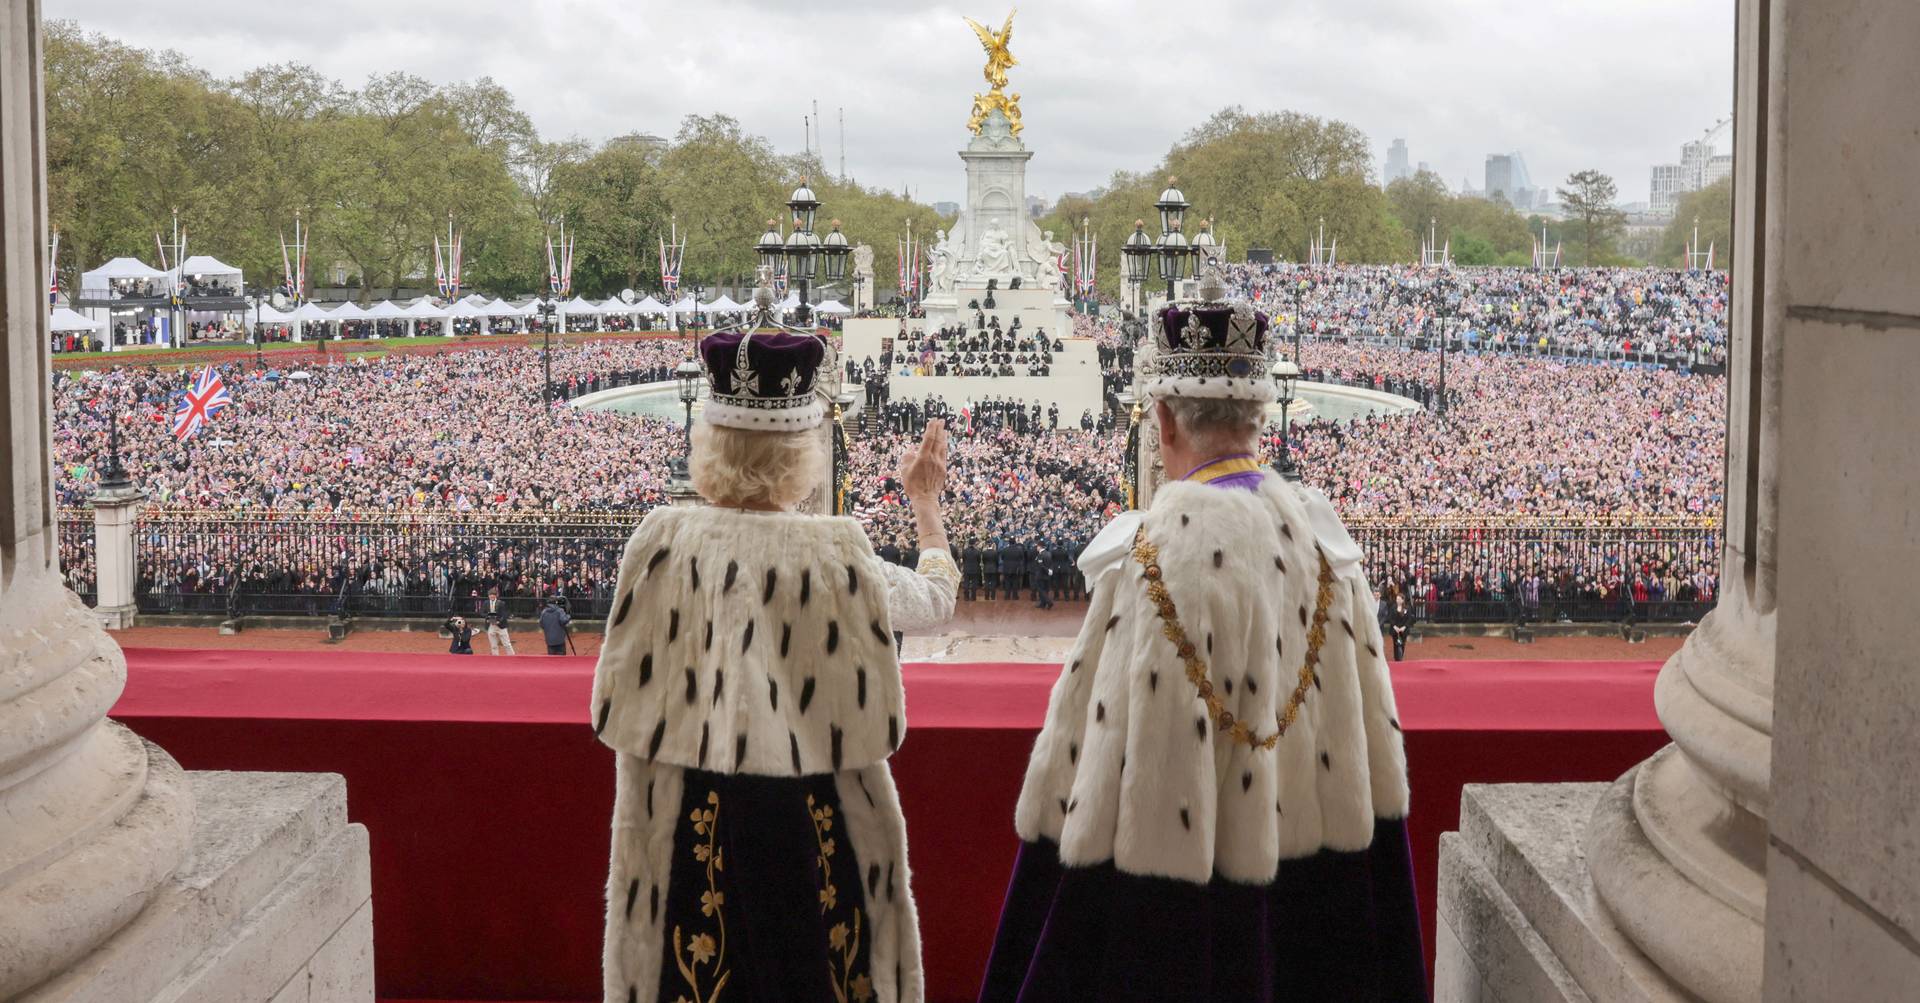 Extra Chapter: Charles III Coronation, Has the United Kingdom Finally Entered the 21st Century?